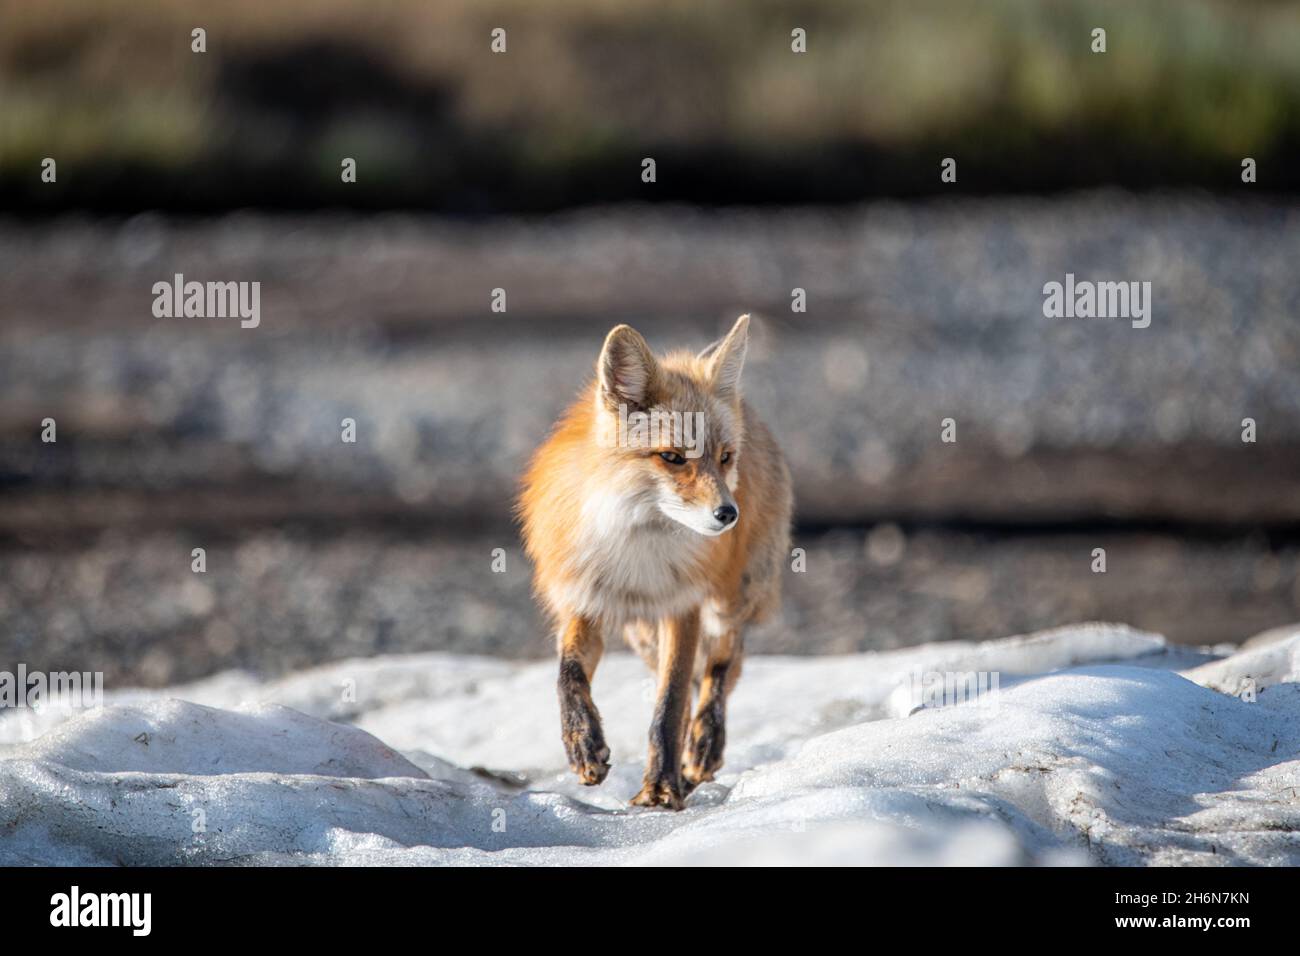 Stunning, healthy red fox seen in Canada while walking along an icy patch of land. Stock Photo